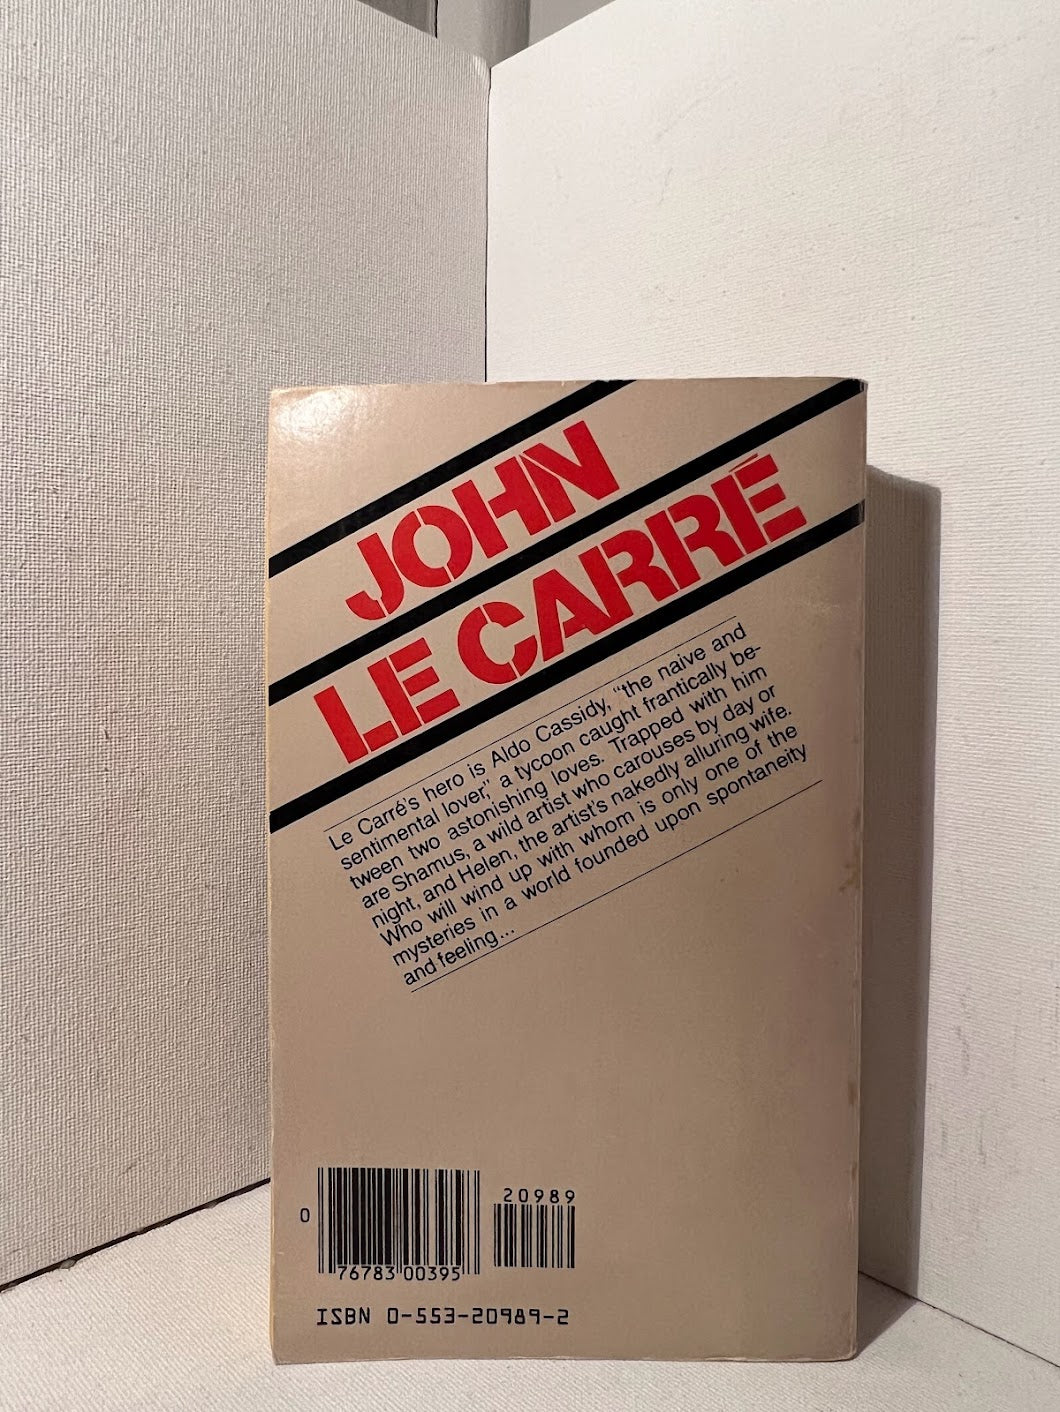 The Naive and Sentimental Lover by John Le Carre